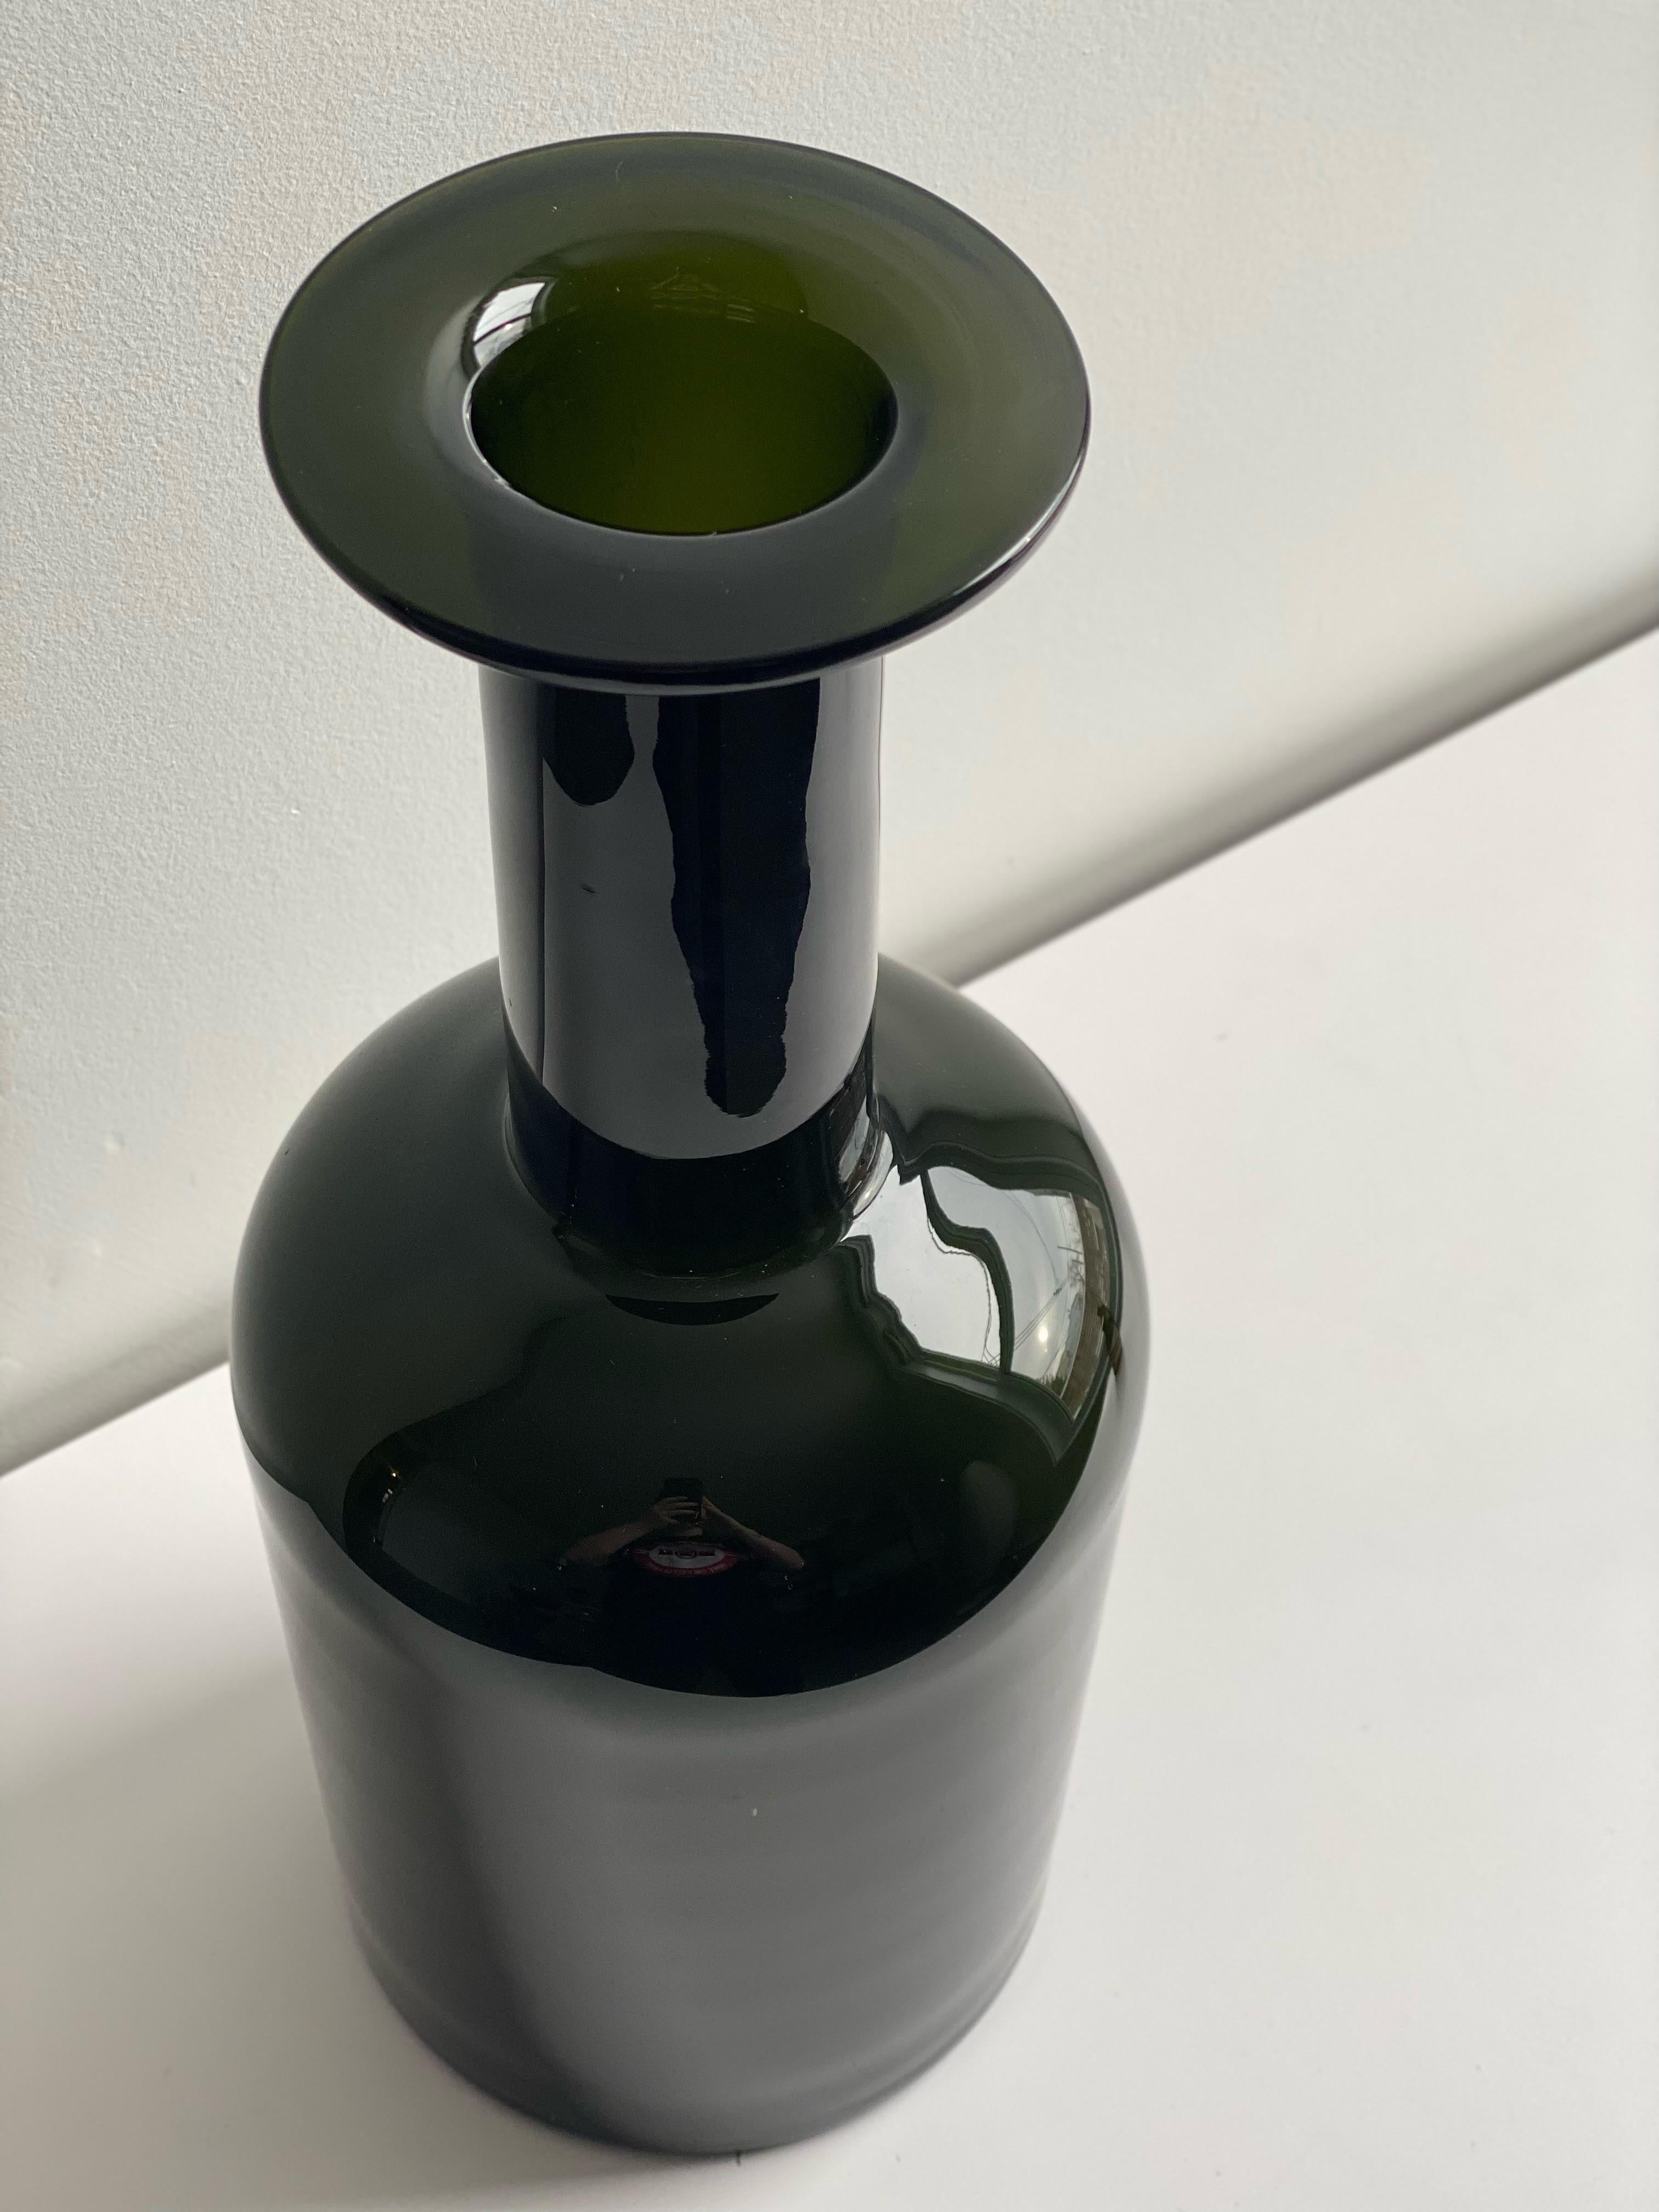 Largest Gulvase by Otto Brauer for Holmegaard, Dark green handblown glass. In good vintage condition with some small marks.